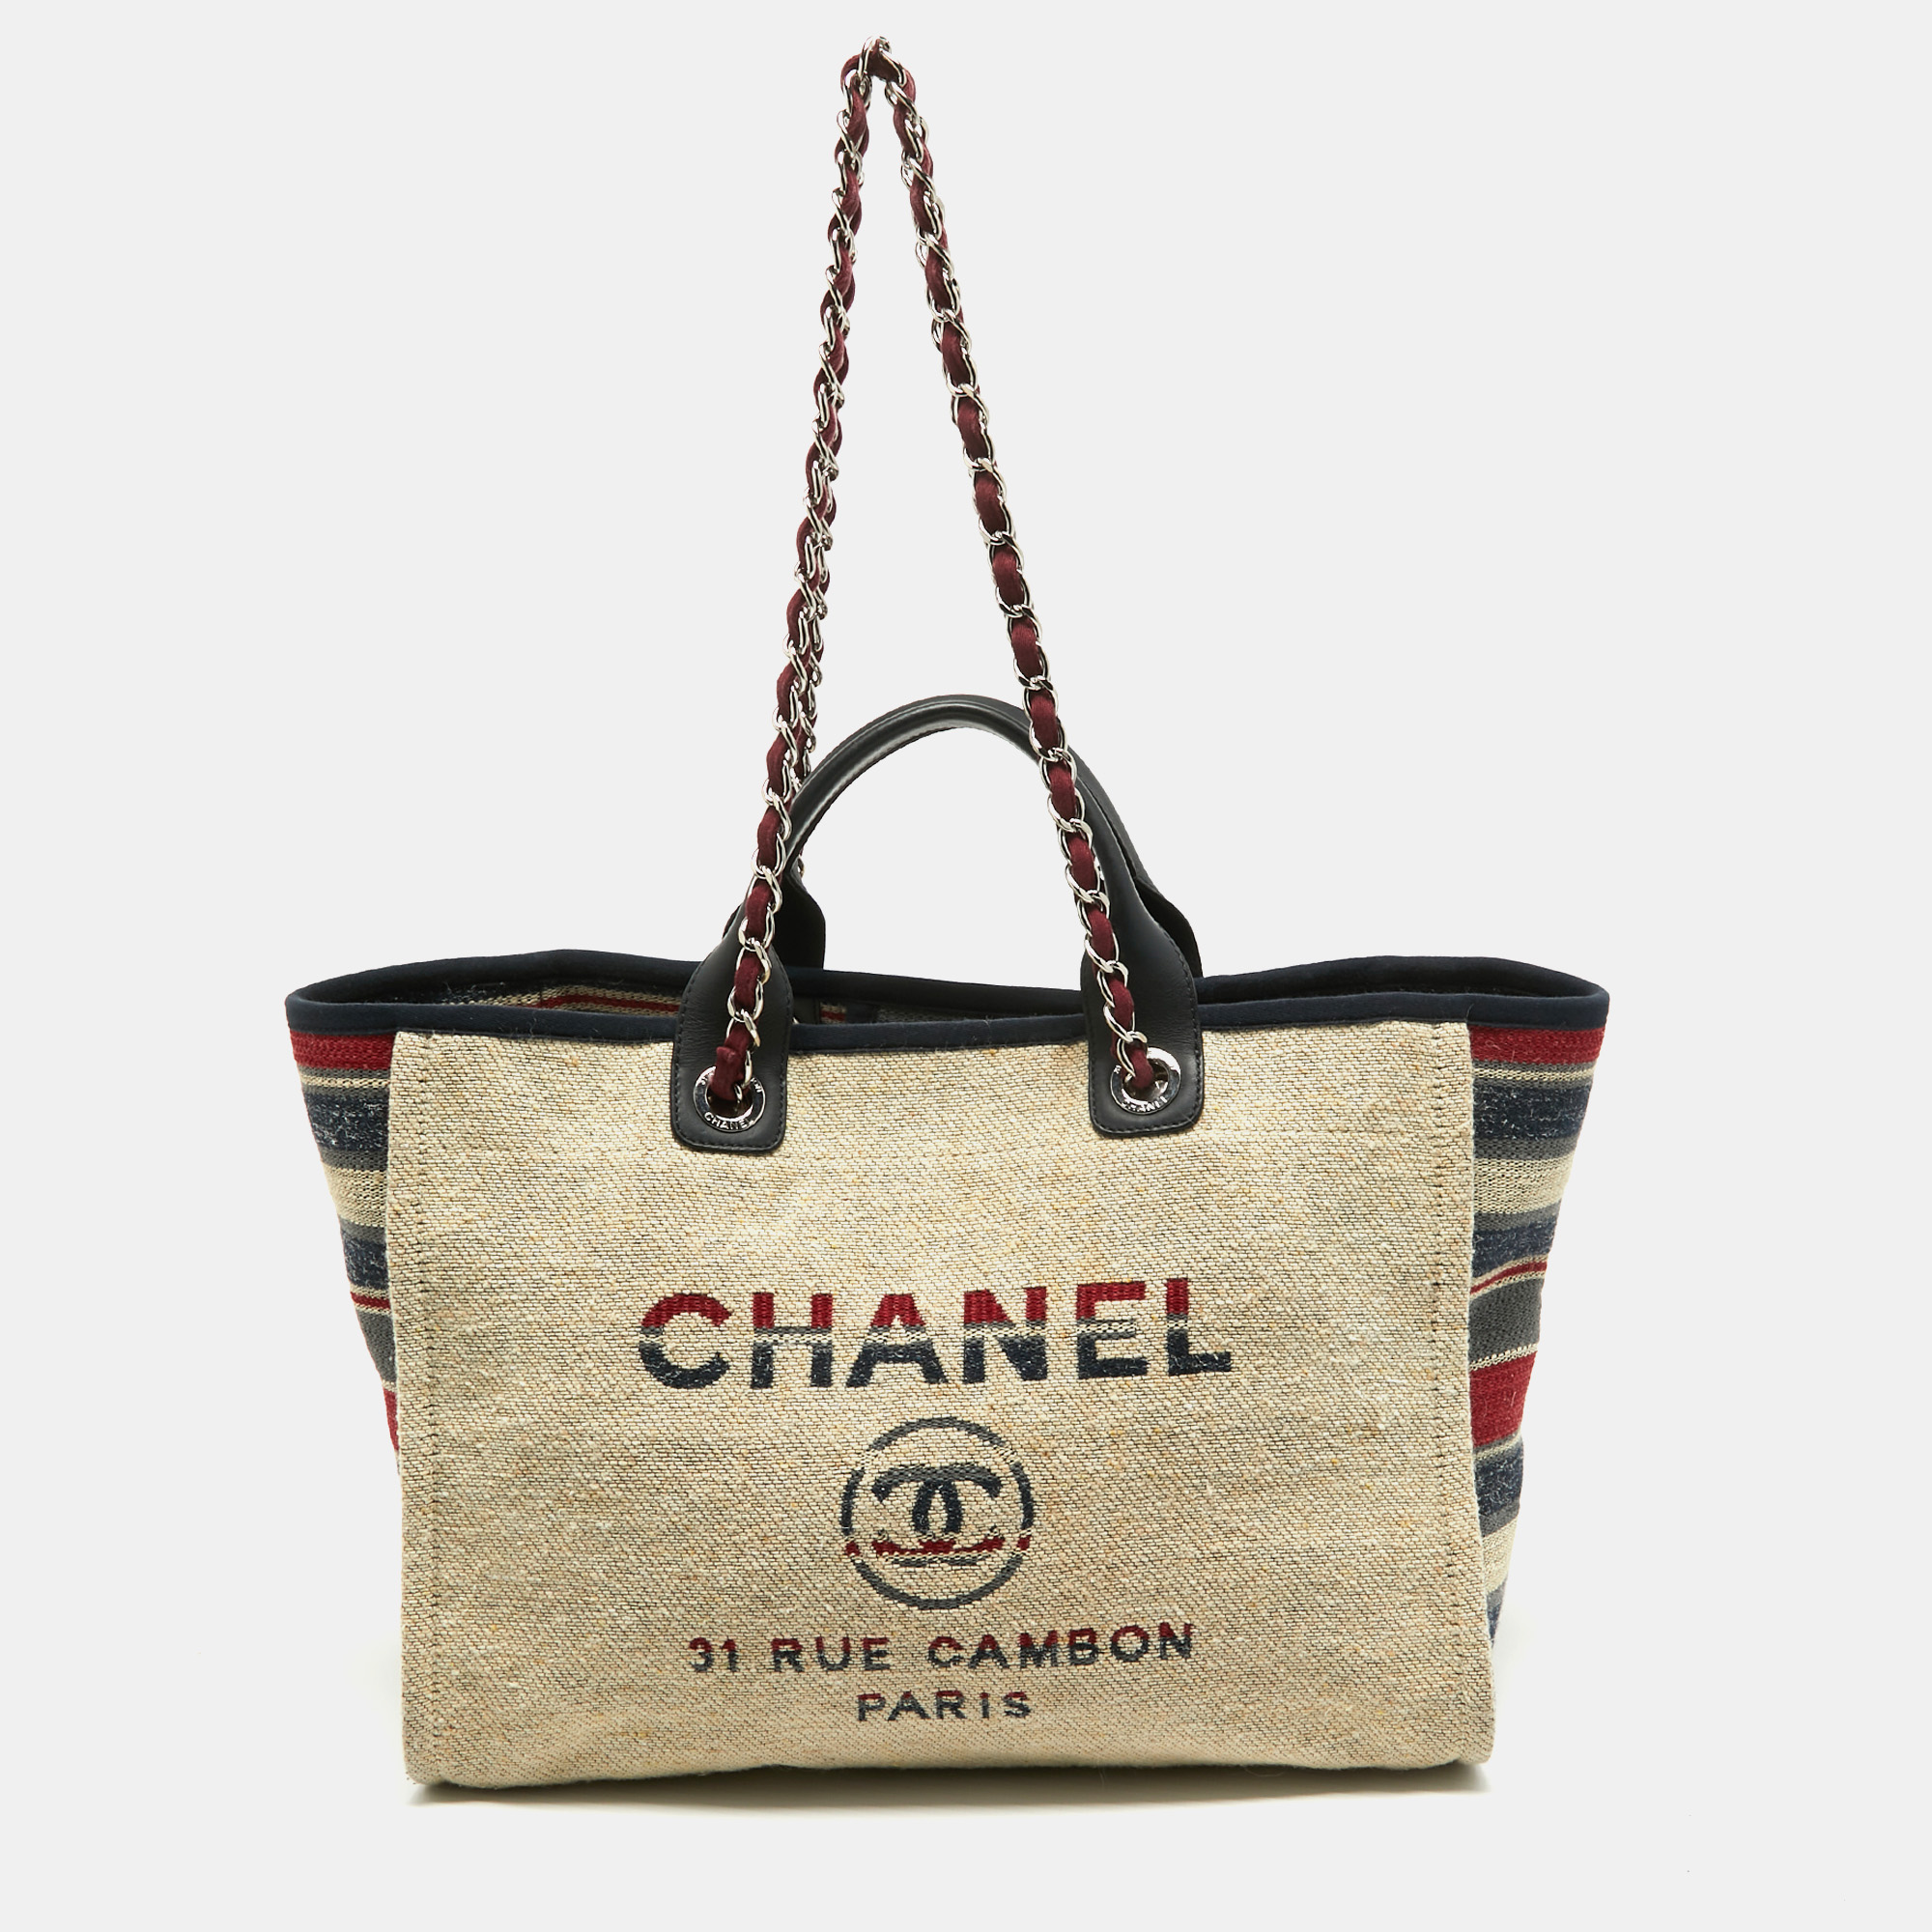 

Chanel Multicolor Stripe Canvas and Leather Large Deauville Shopper Tote